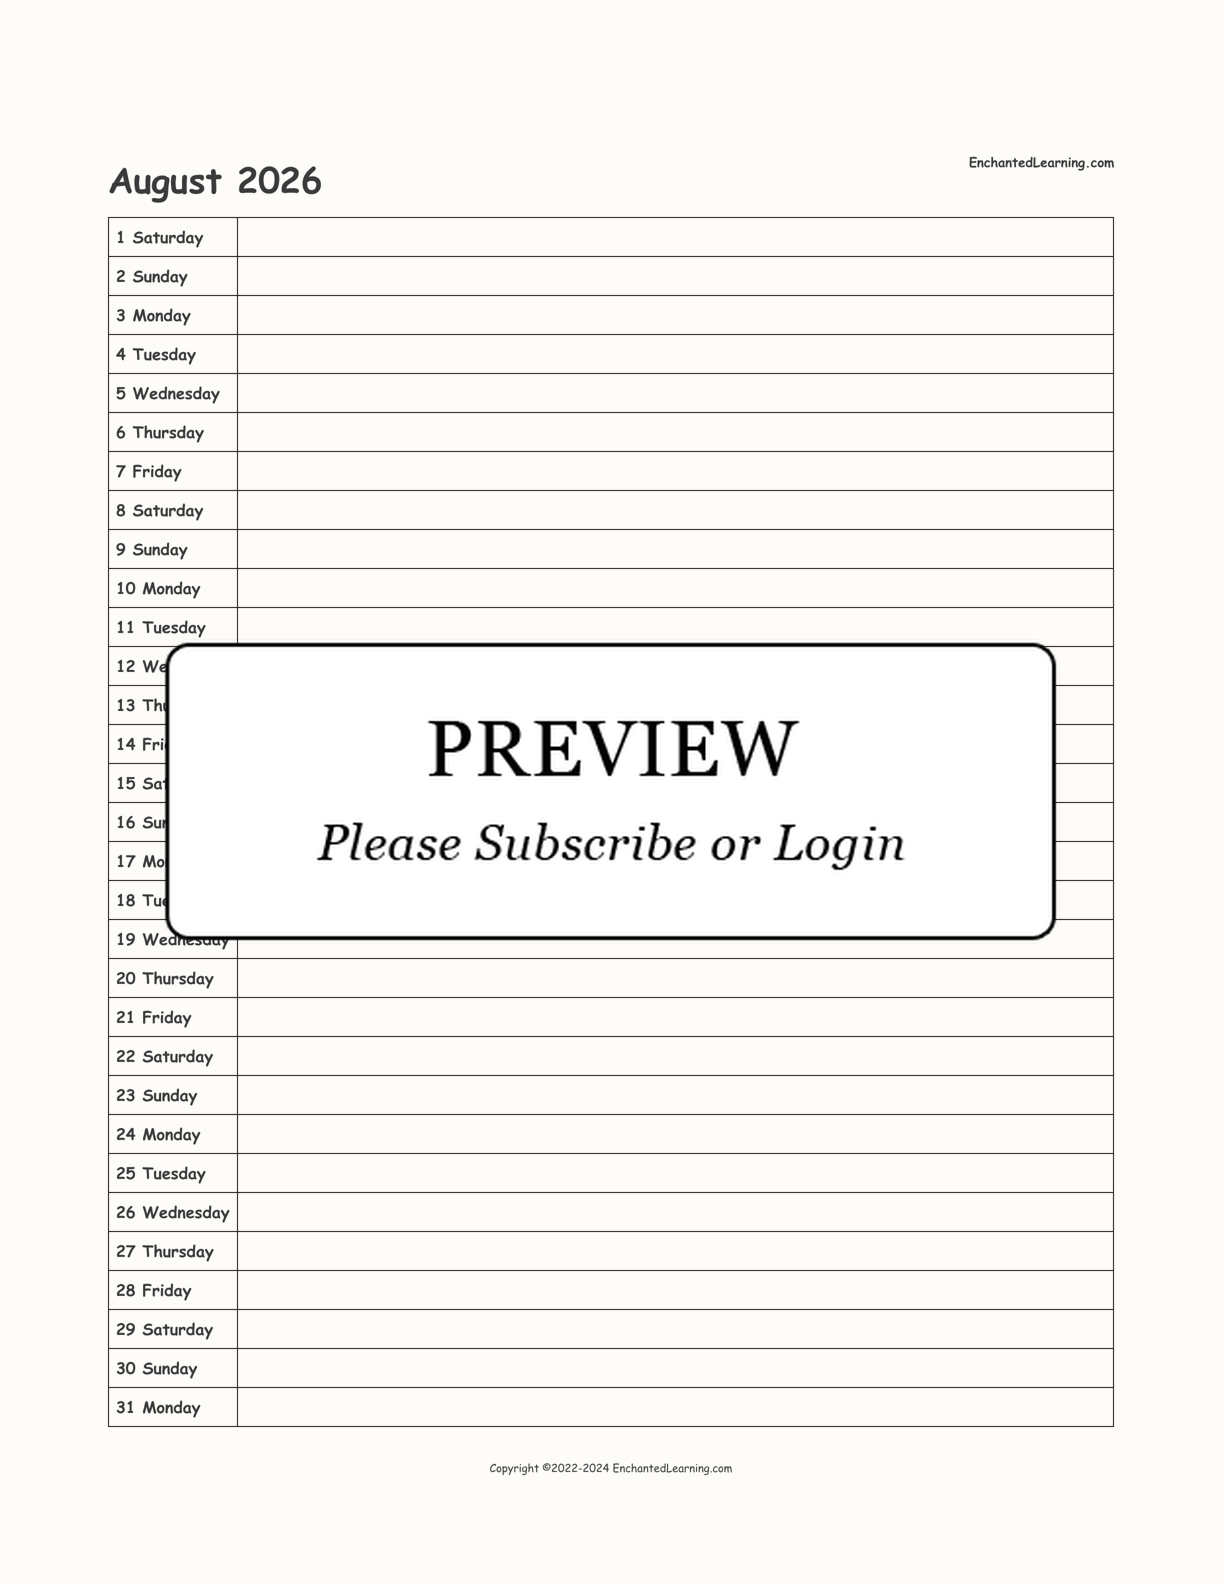 2026 Scheduling Calendar interactive printout page 8